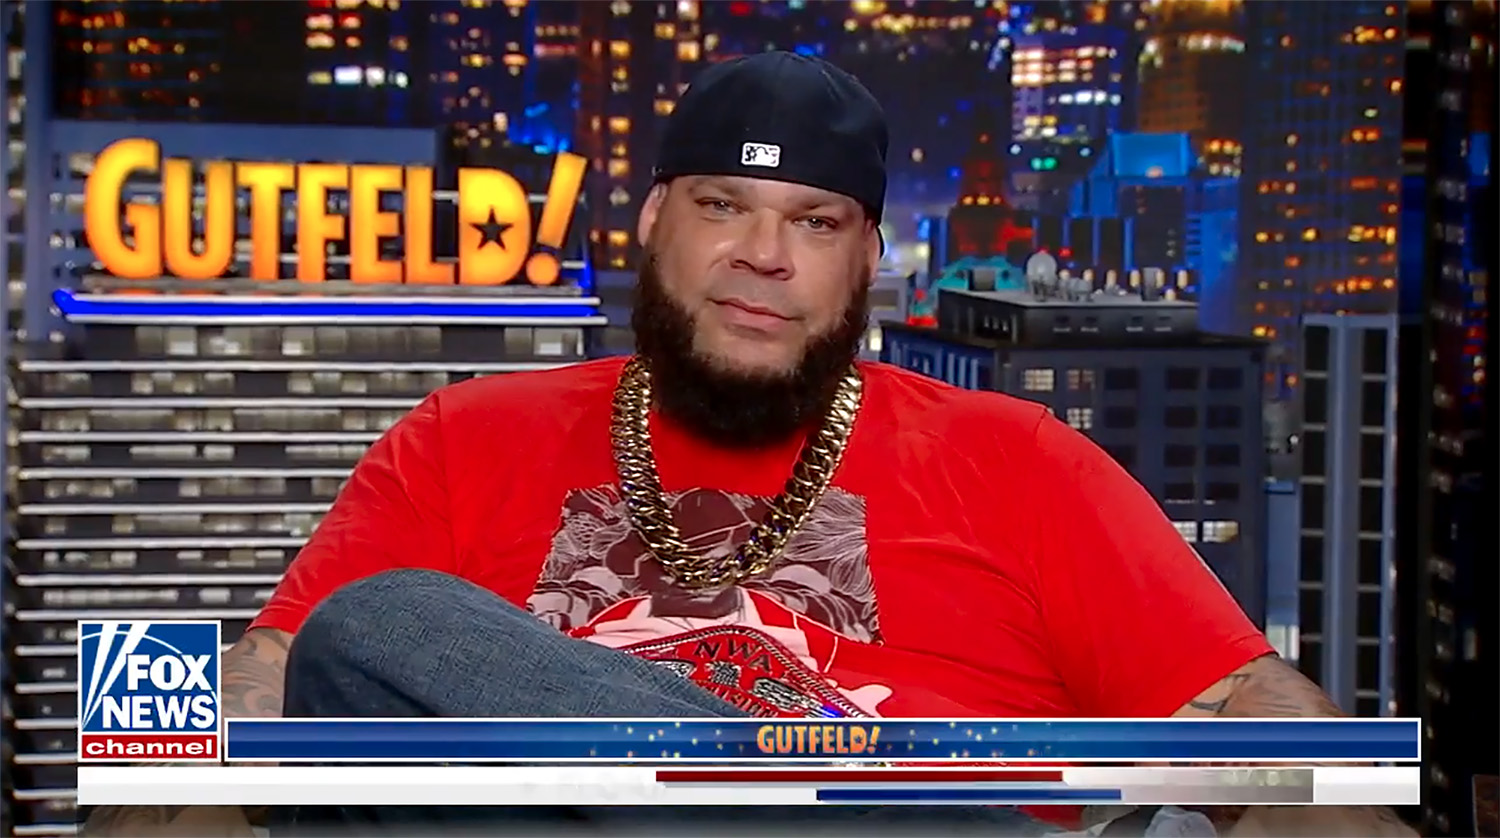 UNK graduate George “Tyrus” Murdoch appears regularly on “Gutfeld!” and other Fox News programs.